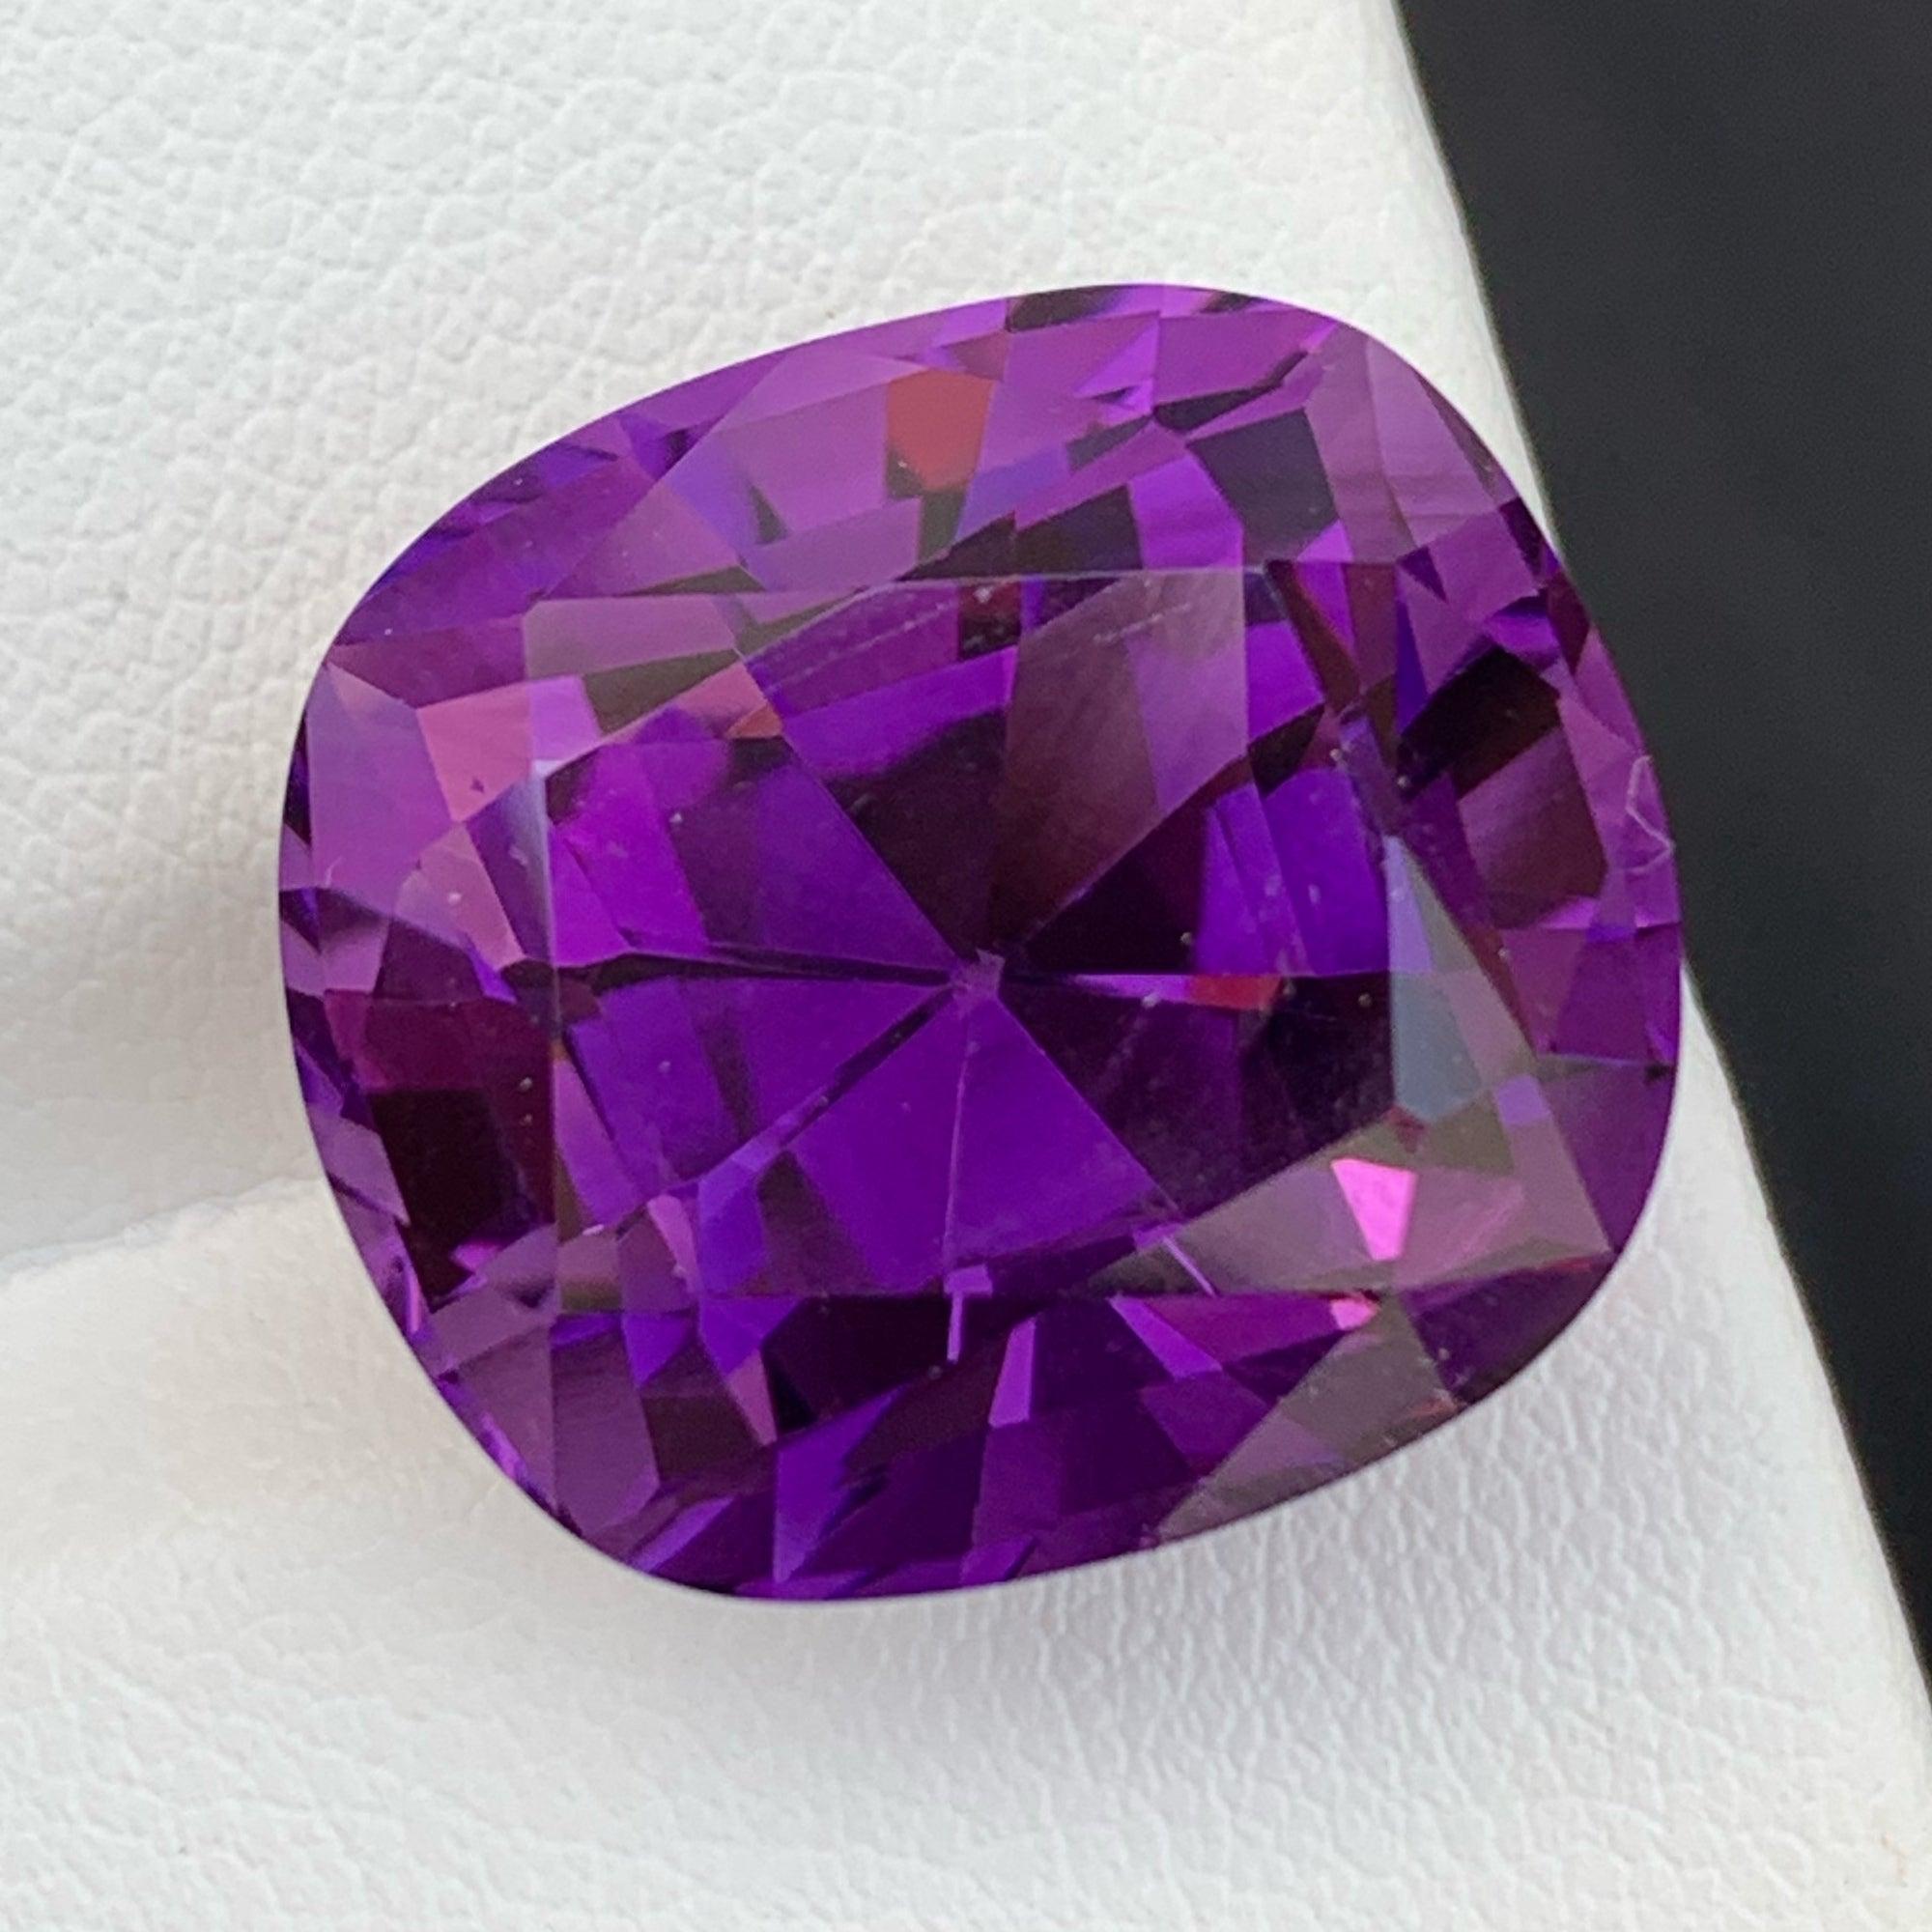 Exquisite Natural Loose Amethyst Stone, Available for sale at wholesale price natural high quality at 23.45 Carats Eye Clean Clarity Natural Loose Amethyst From Brazil.
 
Product Information:
GEMSTONE TYPE:	Exquisite Natural Loose Amethyst